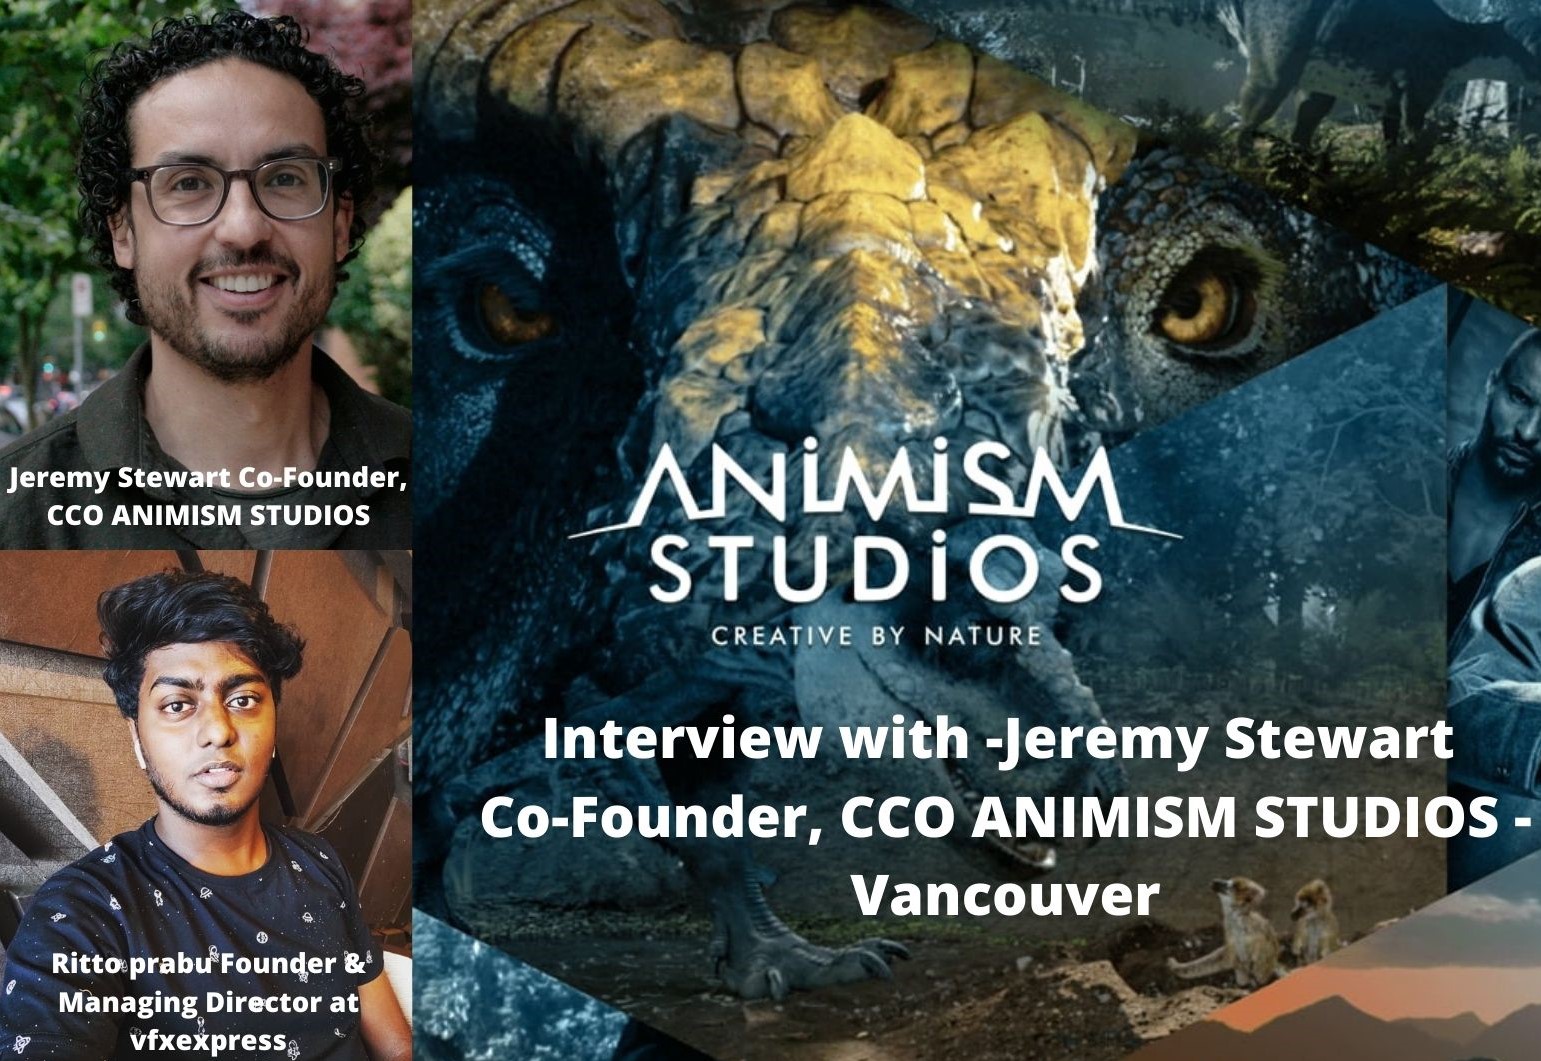 Interview with Jeremy Stewart Co-Founder, CCO ANIMISM STUDIOS -Vancouver